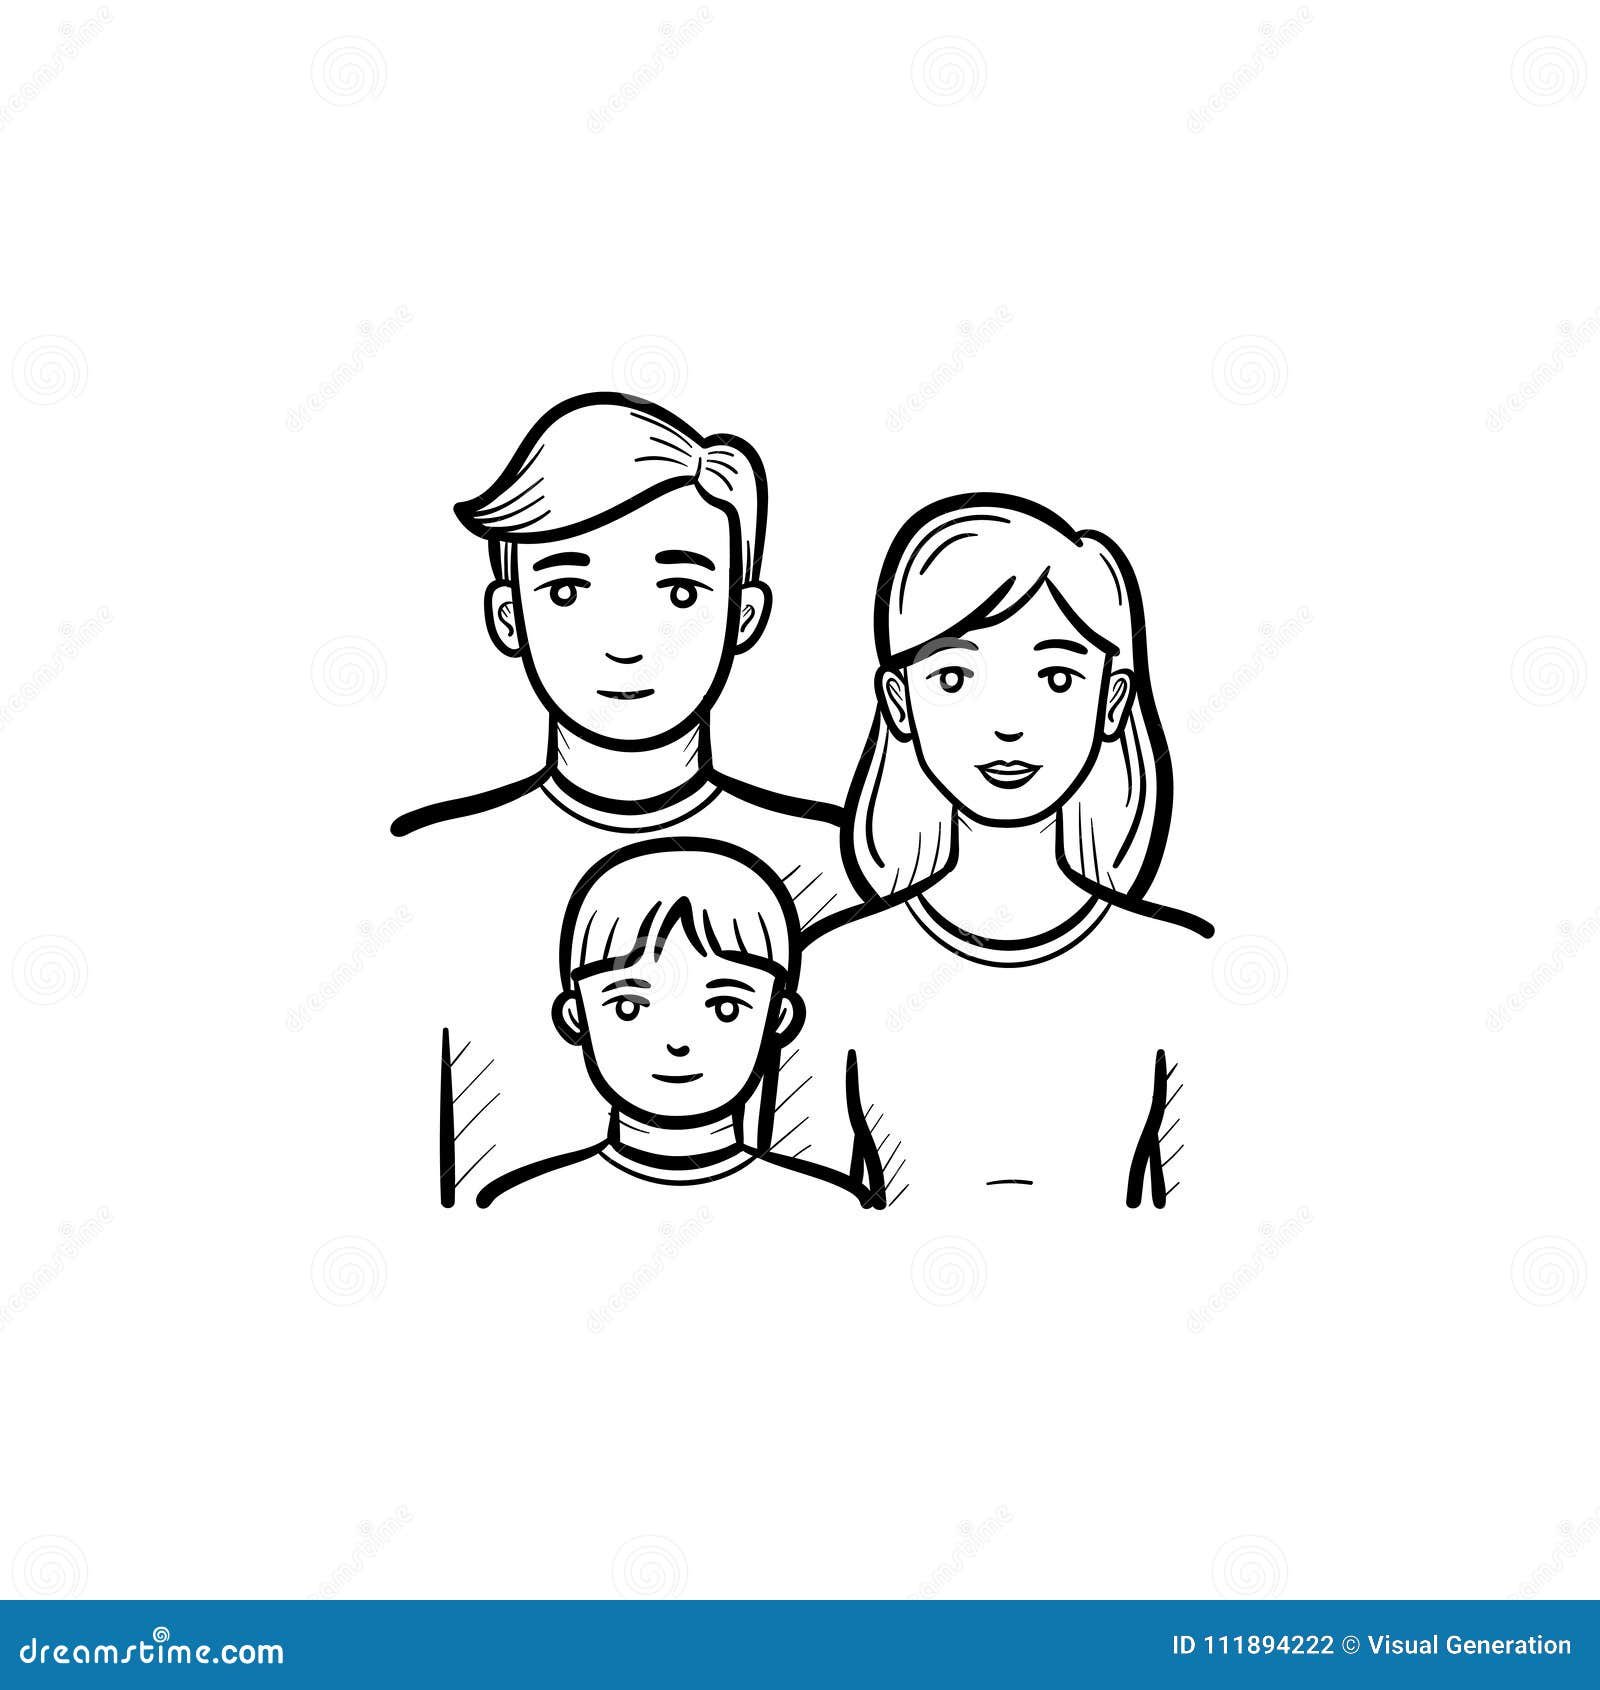 Family sketch Images - Search Images on Everypixel